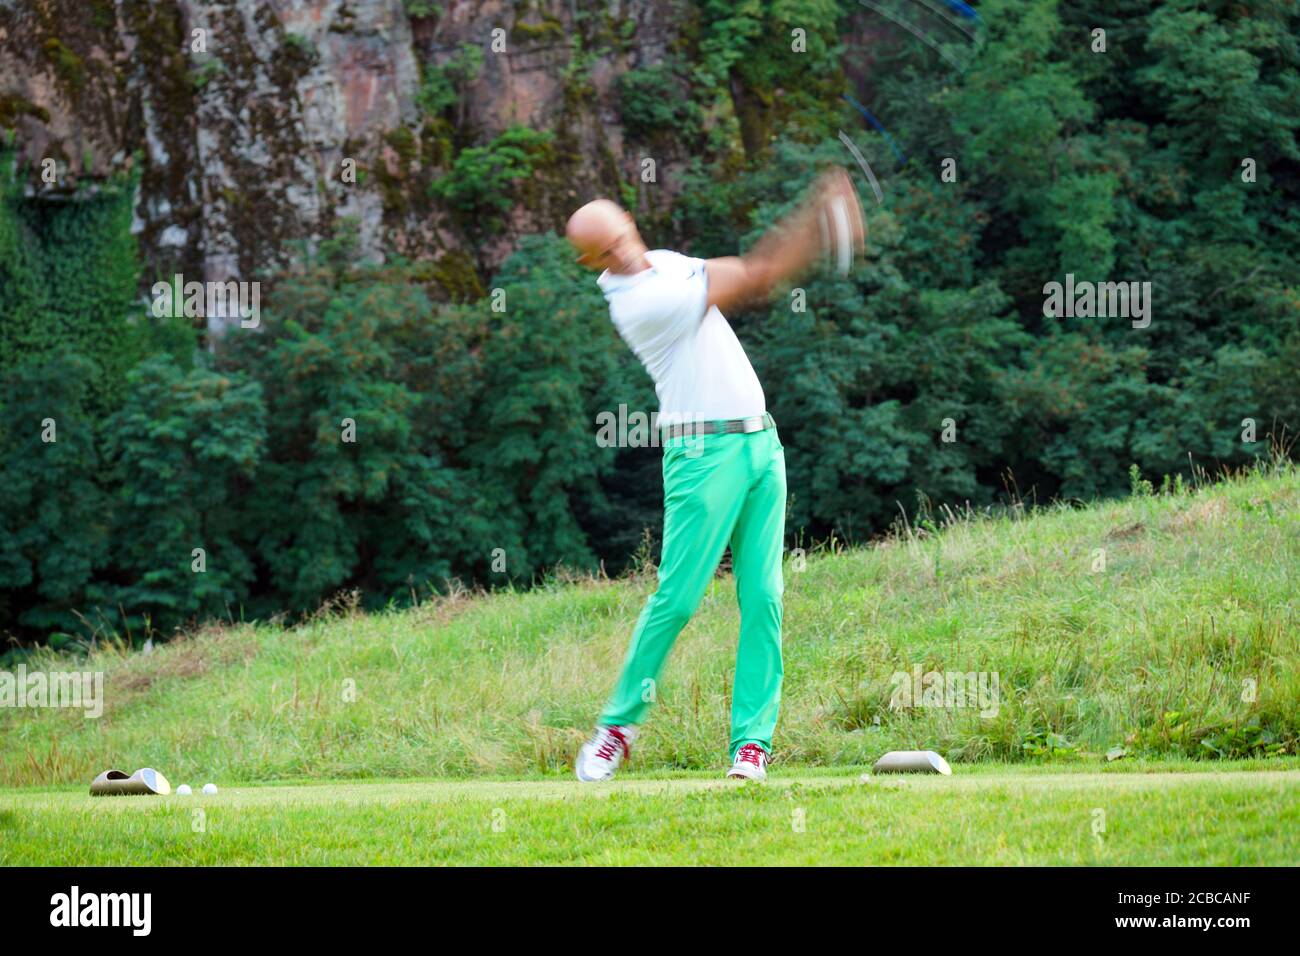 Blurred movement of a male golfer teeing-off at the Blue Monster golf club in South Tirol, Italy in summer of 2020. Stock Photo